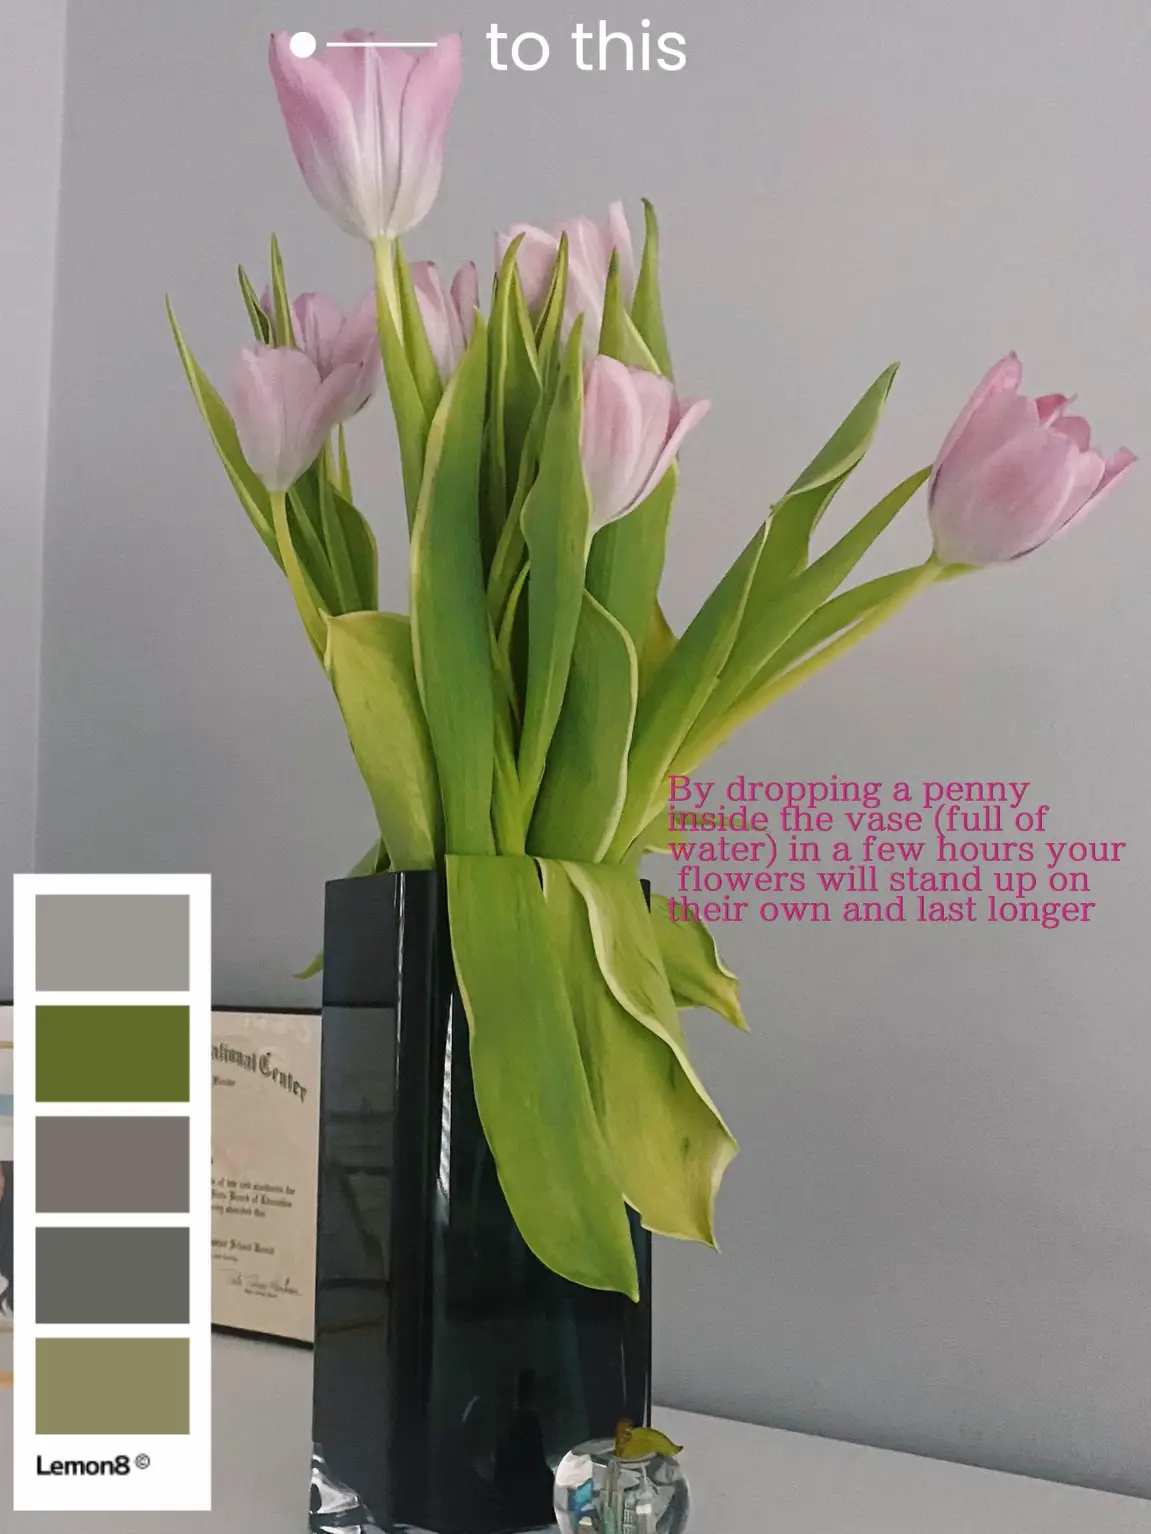 The Truth About Penny in the Vase for Your Flower Arrangements